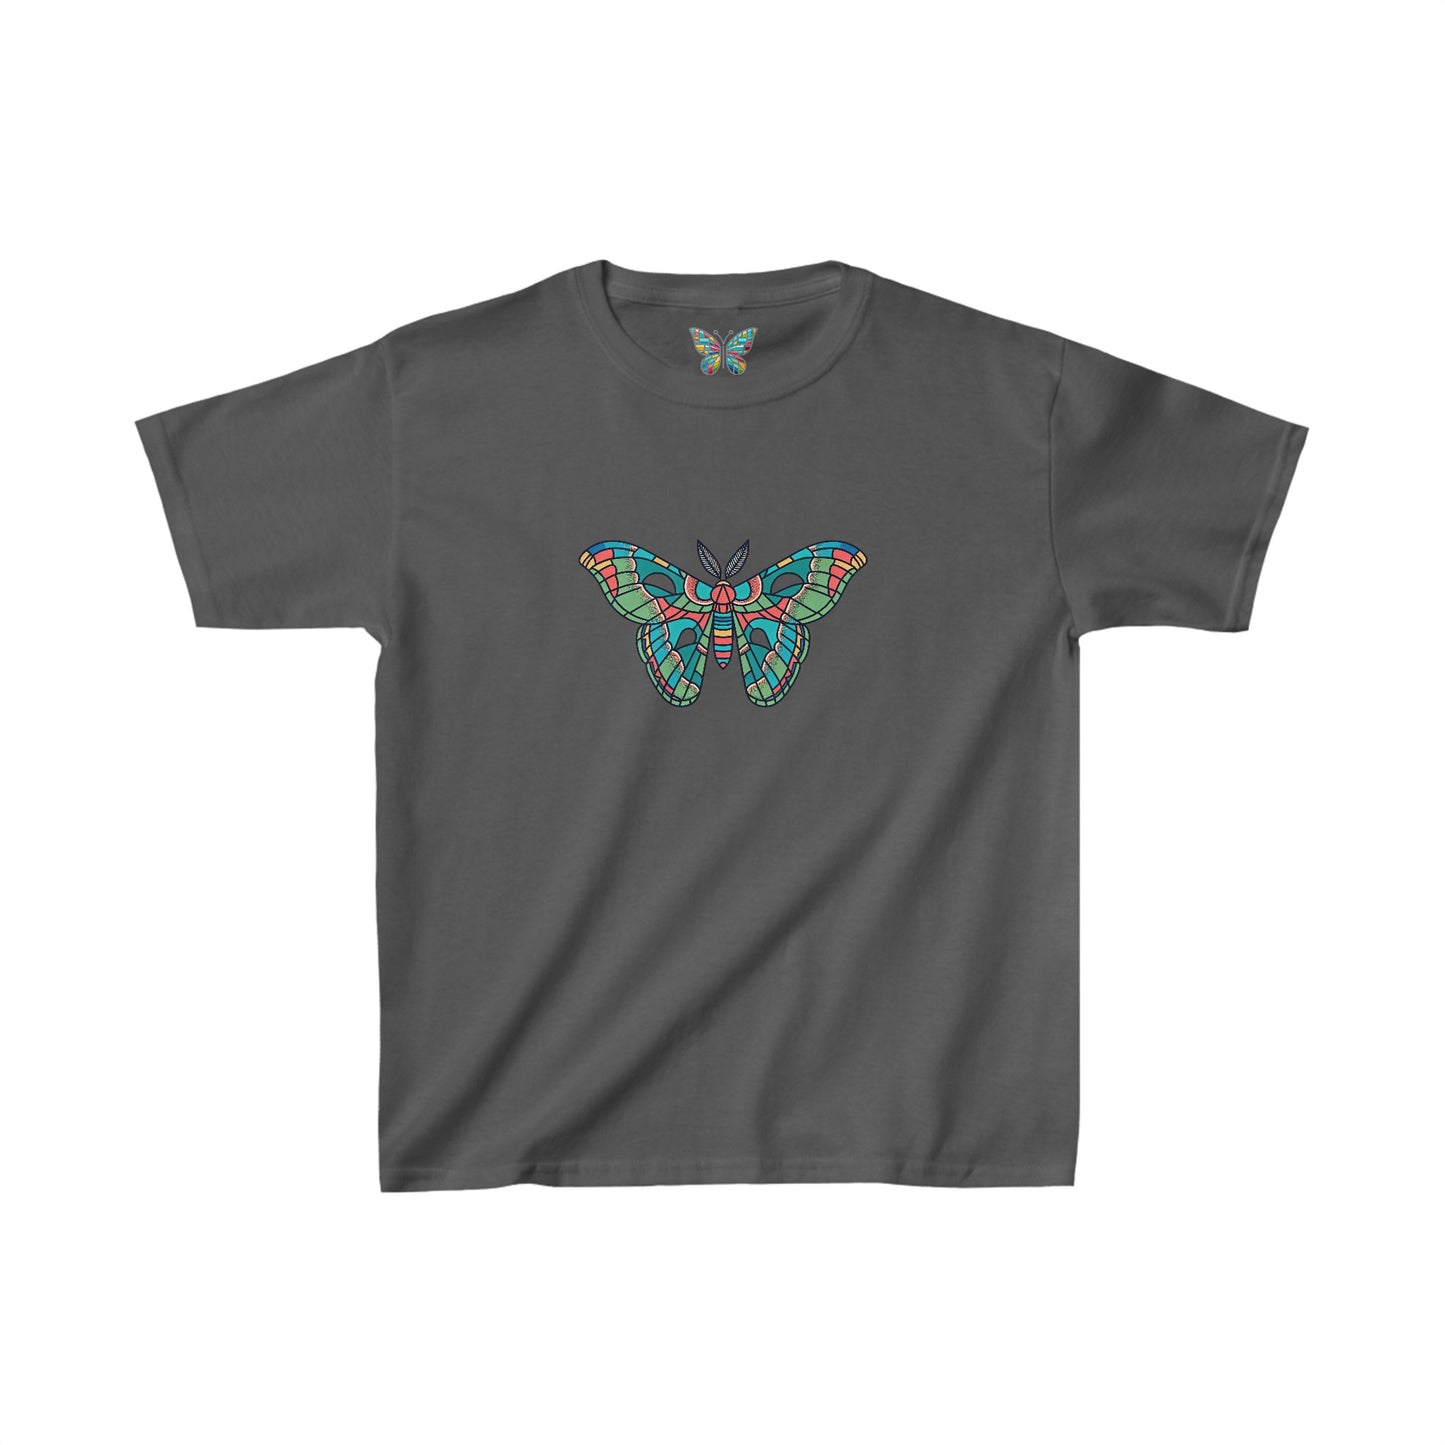 Atlas Moth Serenluce - Youth - Snazzle Tee